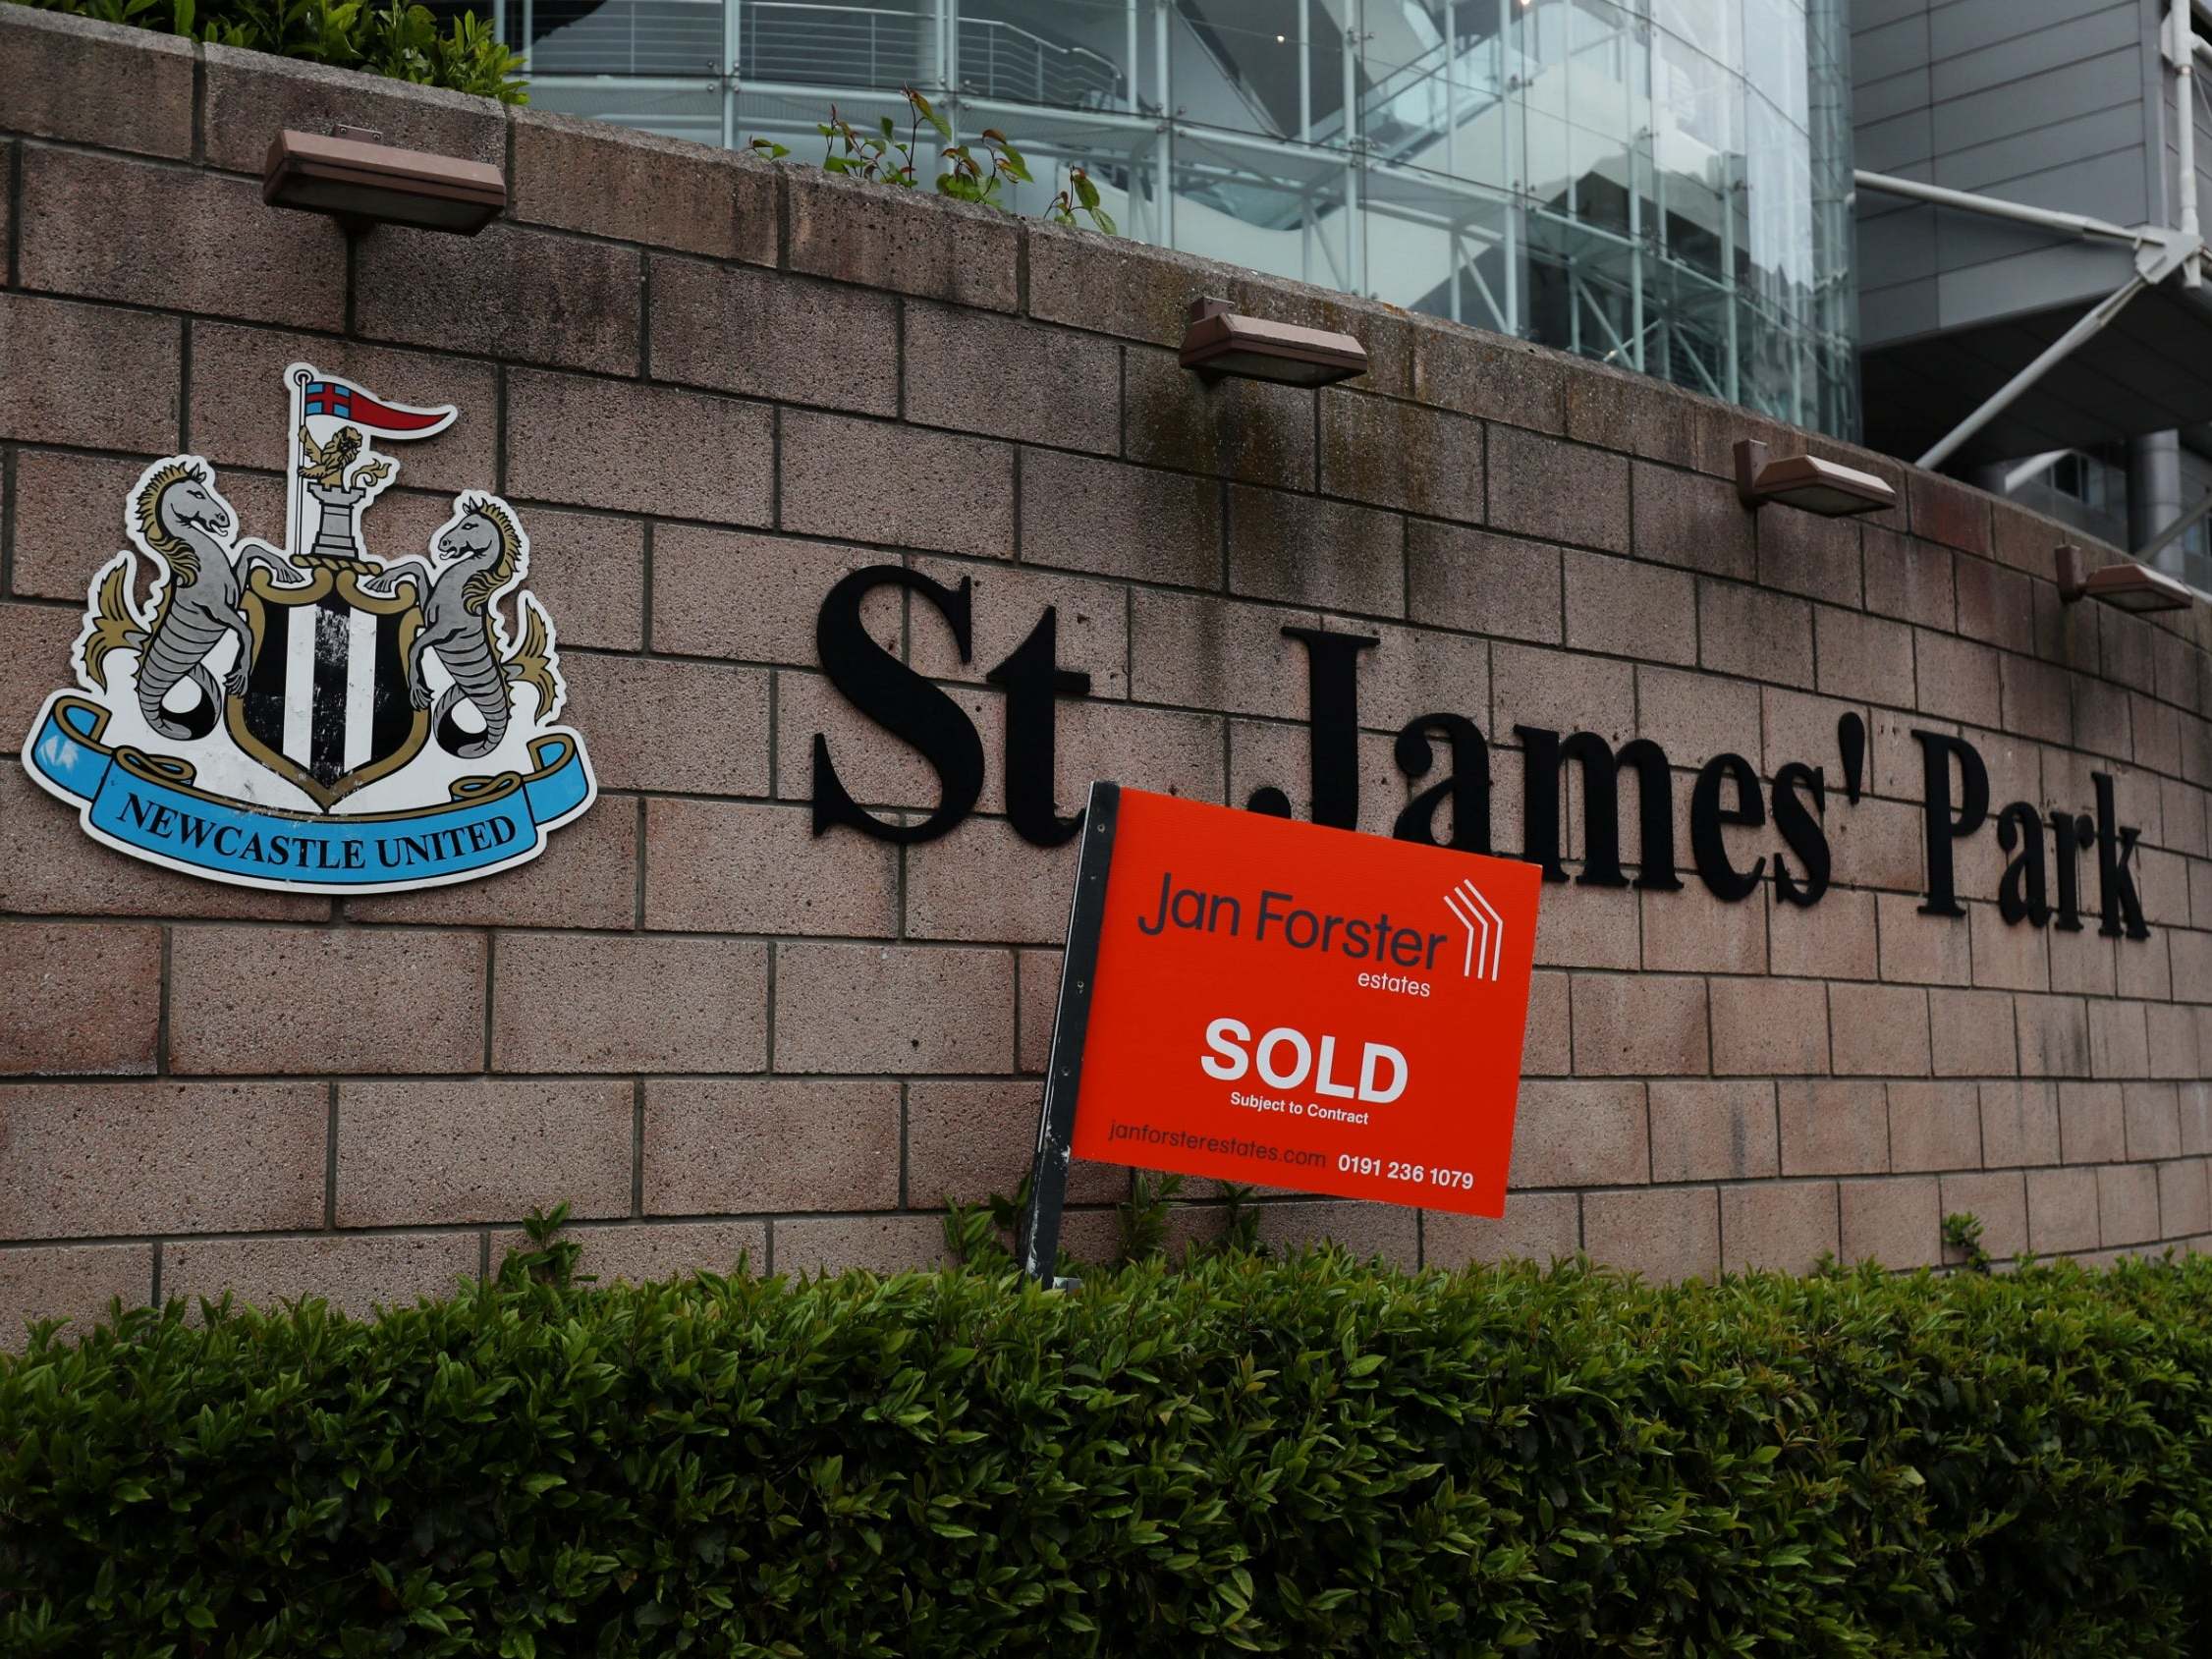 Newcastle United is set to be sold to a Saudi Arabia consortium for £300m